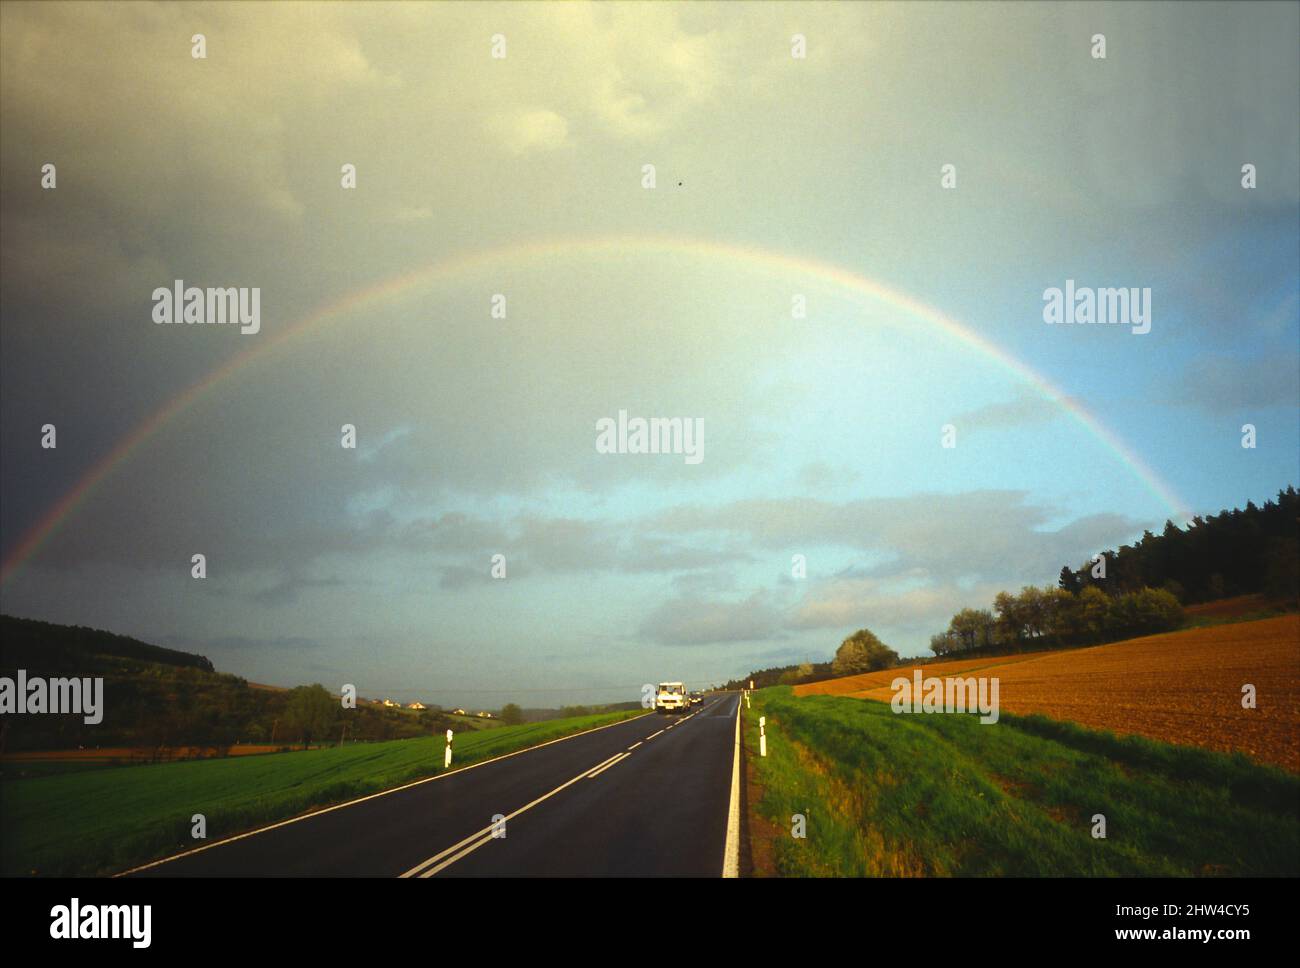 Highway with rainbow in Bavaria, Germany. Stock Photo